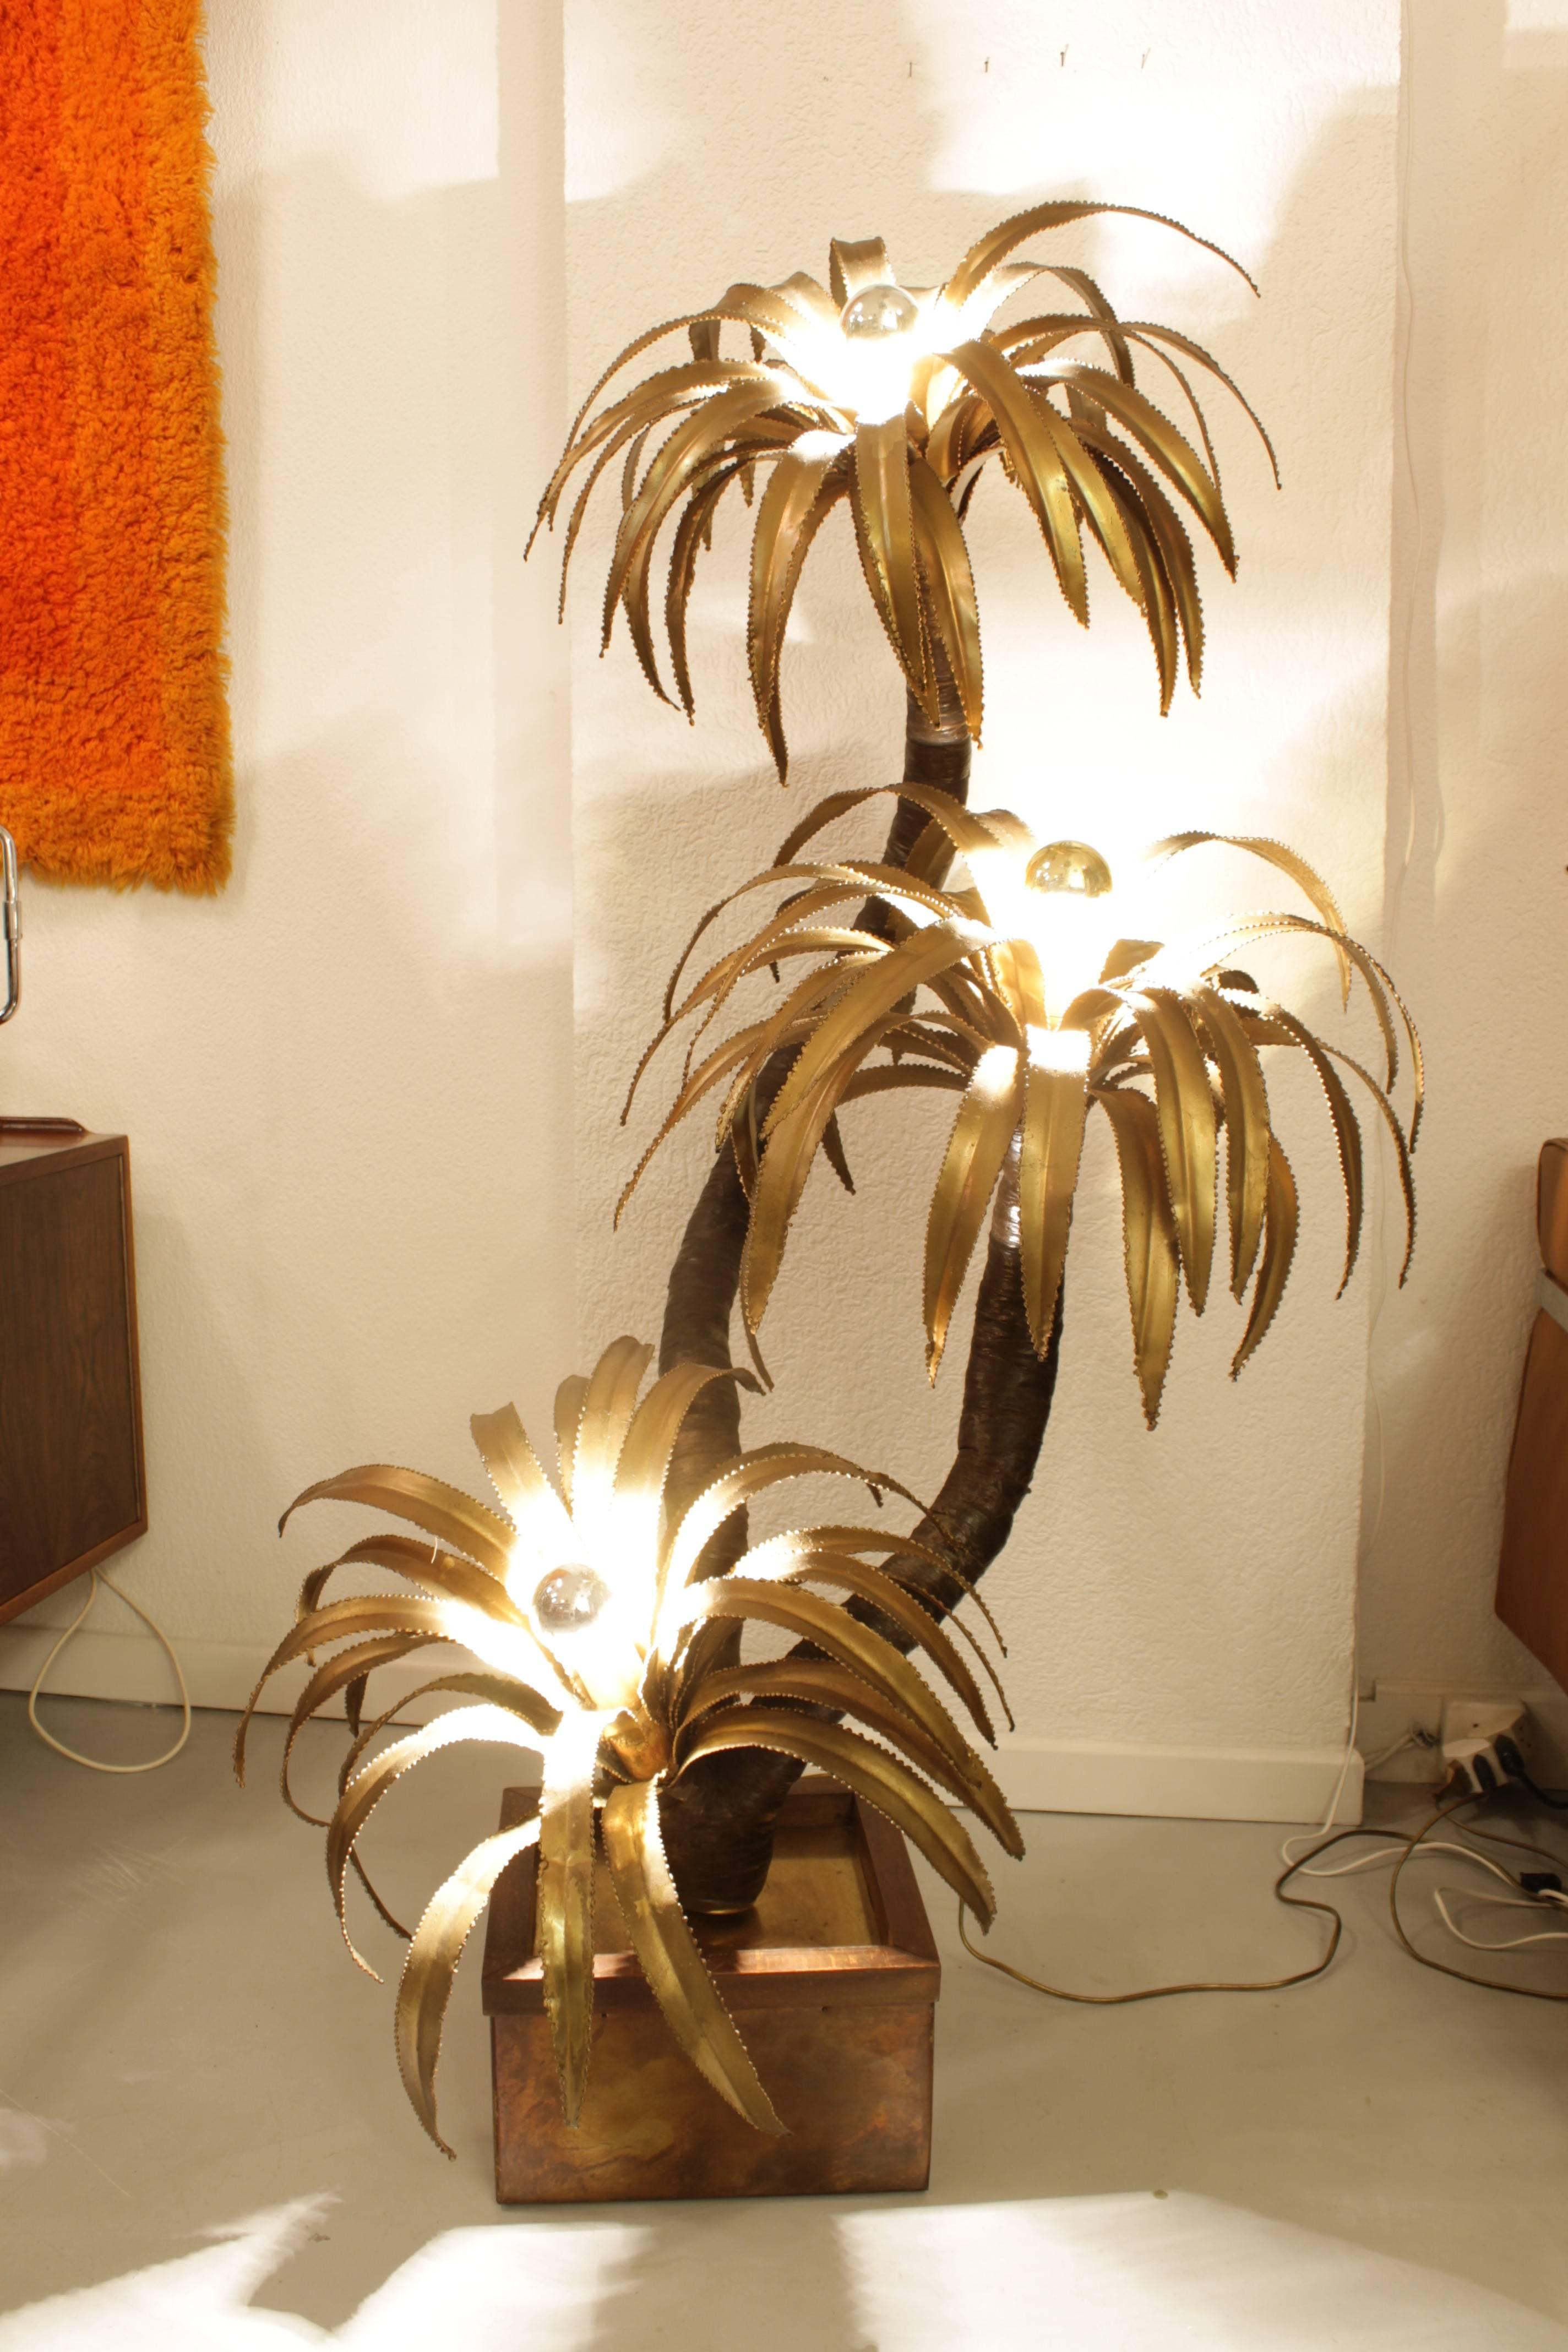 Palm tree floor lamp, brown paper arms, copper leaves
One leaf is missing (picture).